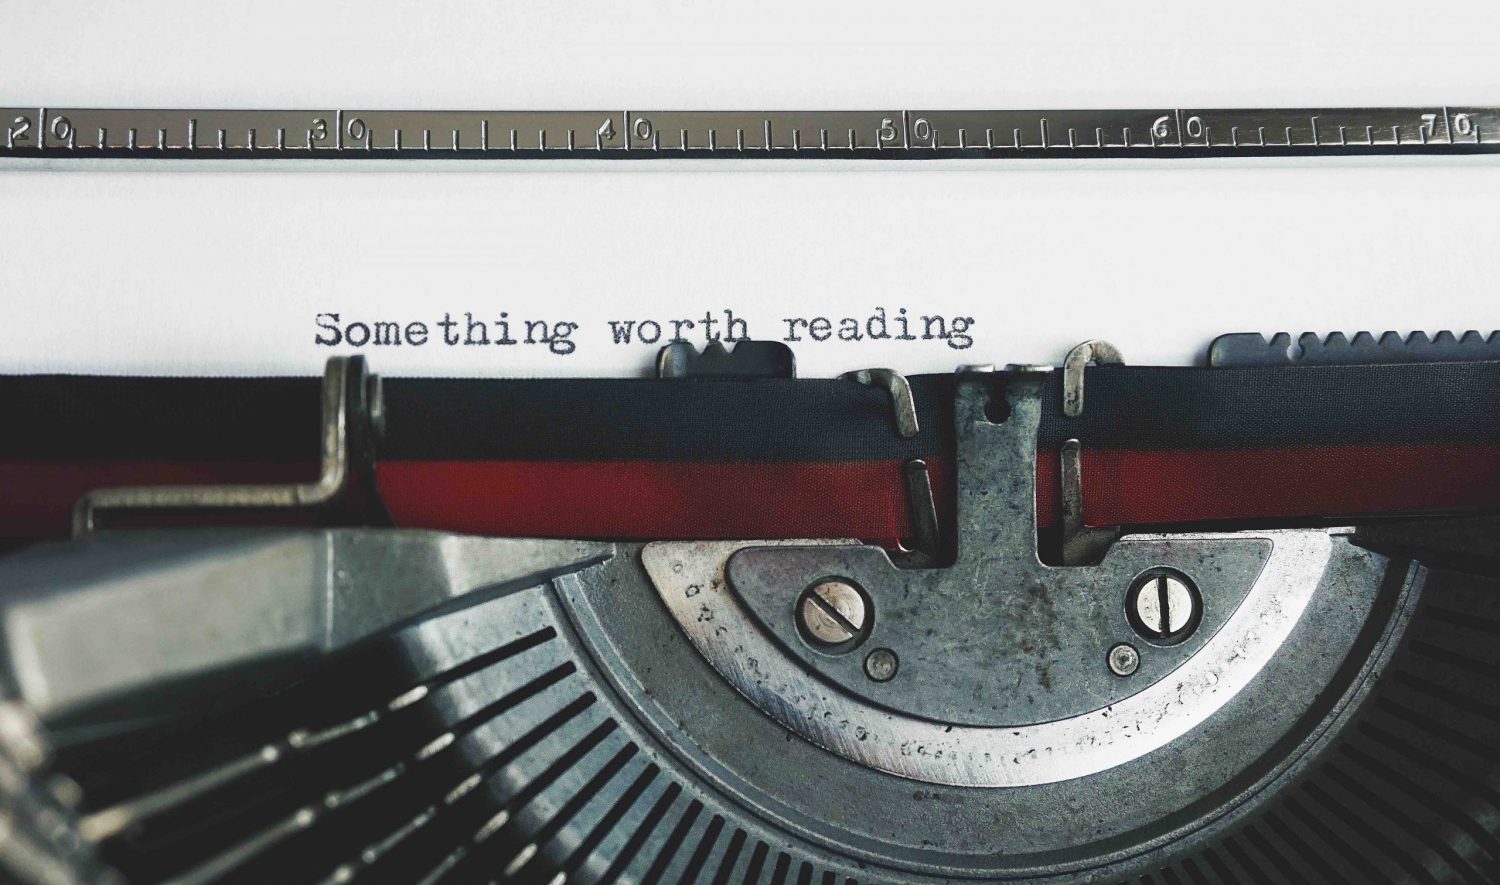 A typewriter with "something worth reading" typed on the paper, symbolising the value a manuscript proofreader brings to an author's writing.